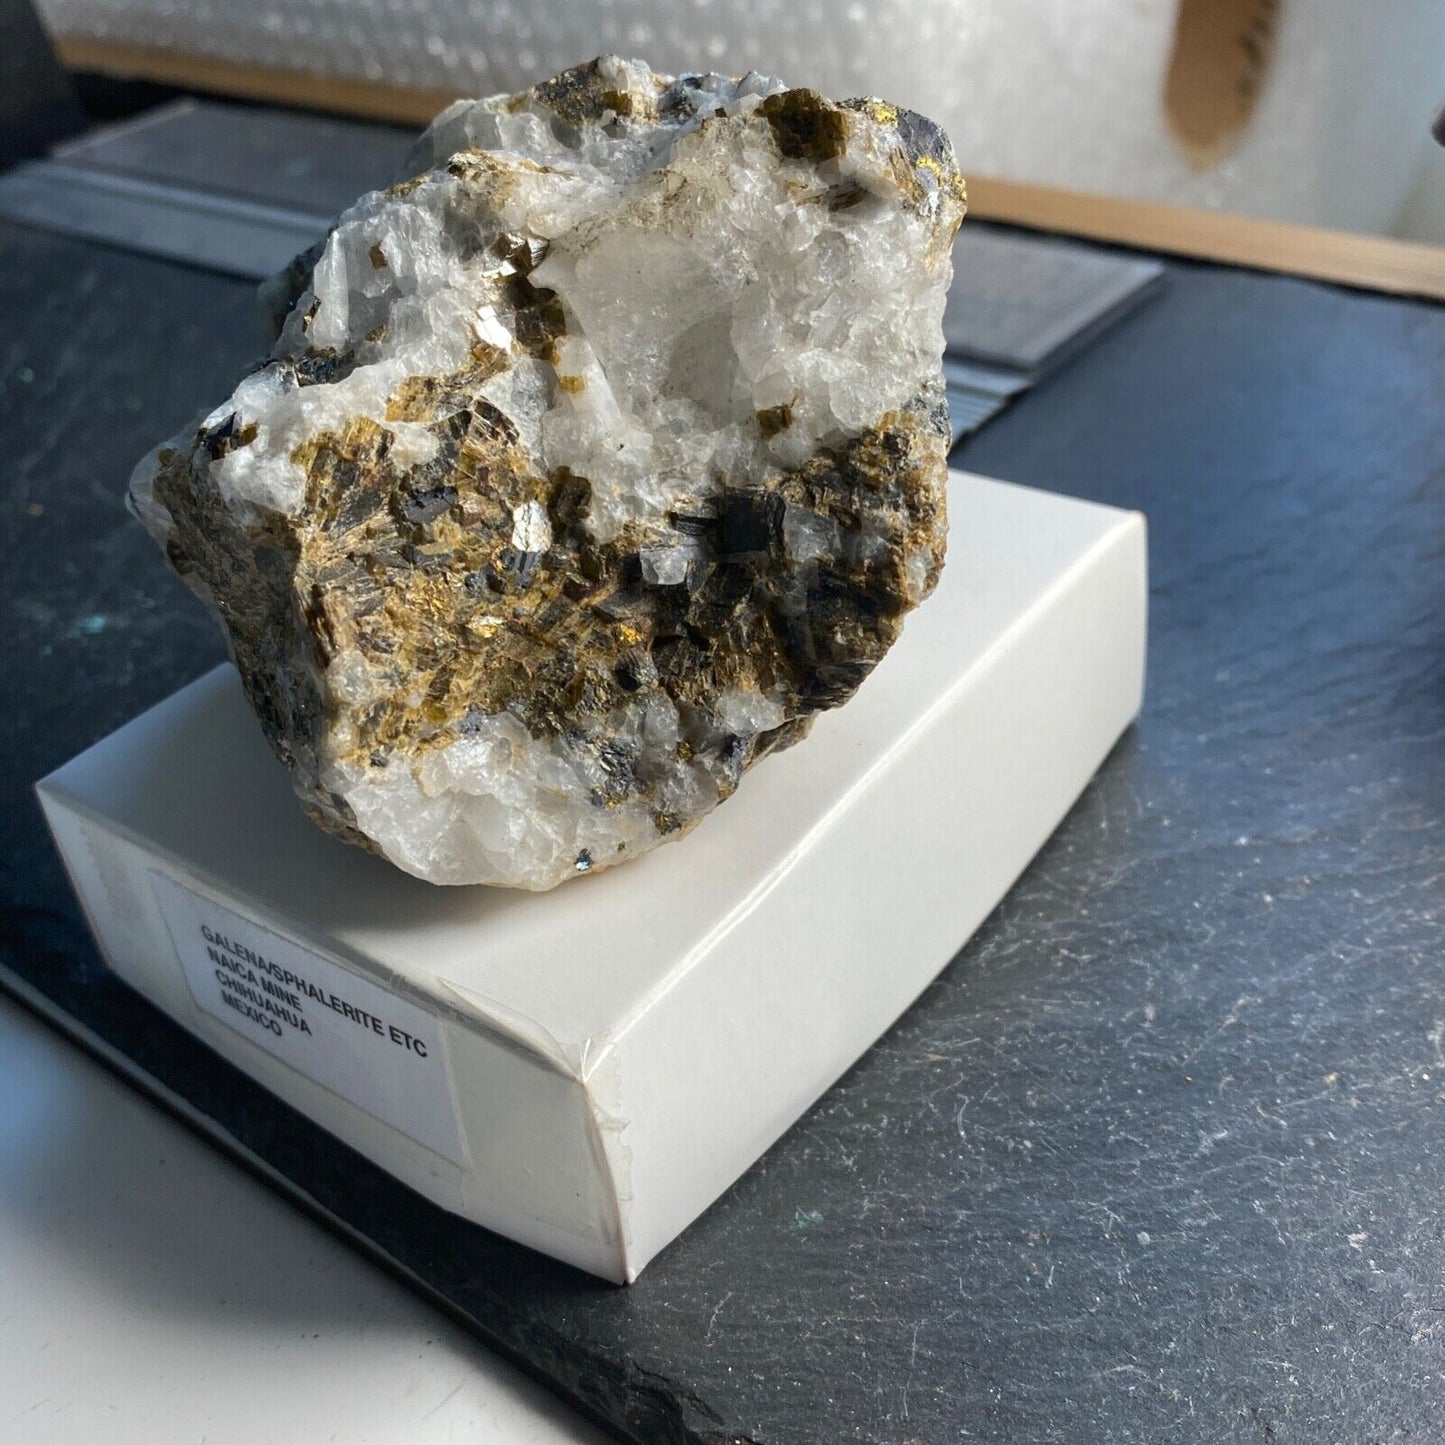 INTERESTING MULTI- MINERAL SPECIMEN FROM NAICA MINE, MEXICO LARGE 480g MF1179